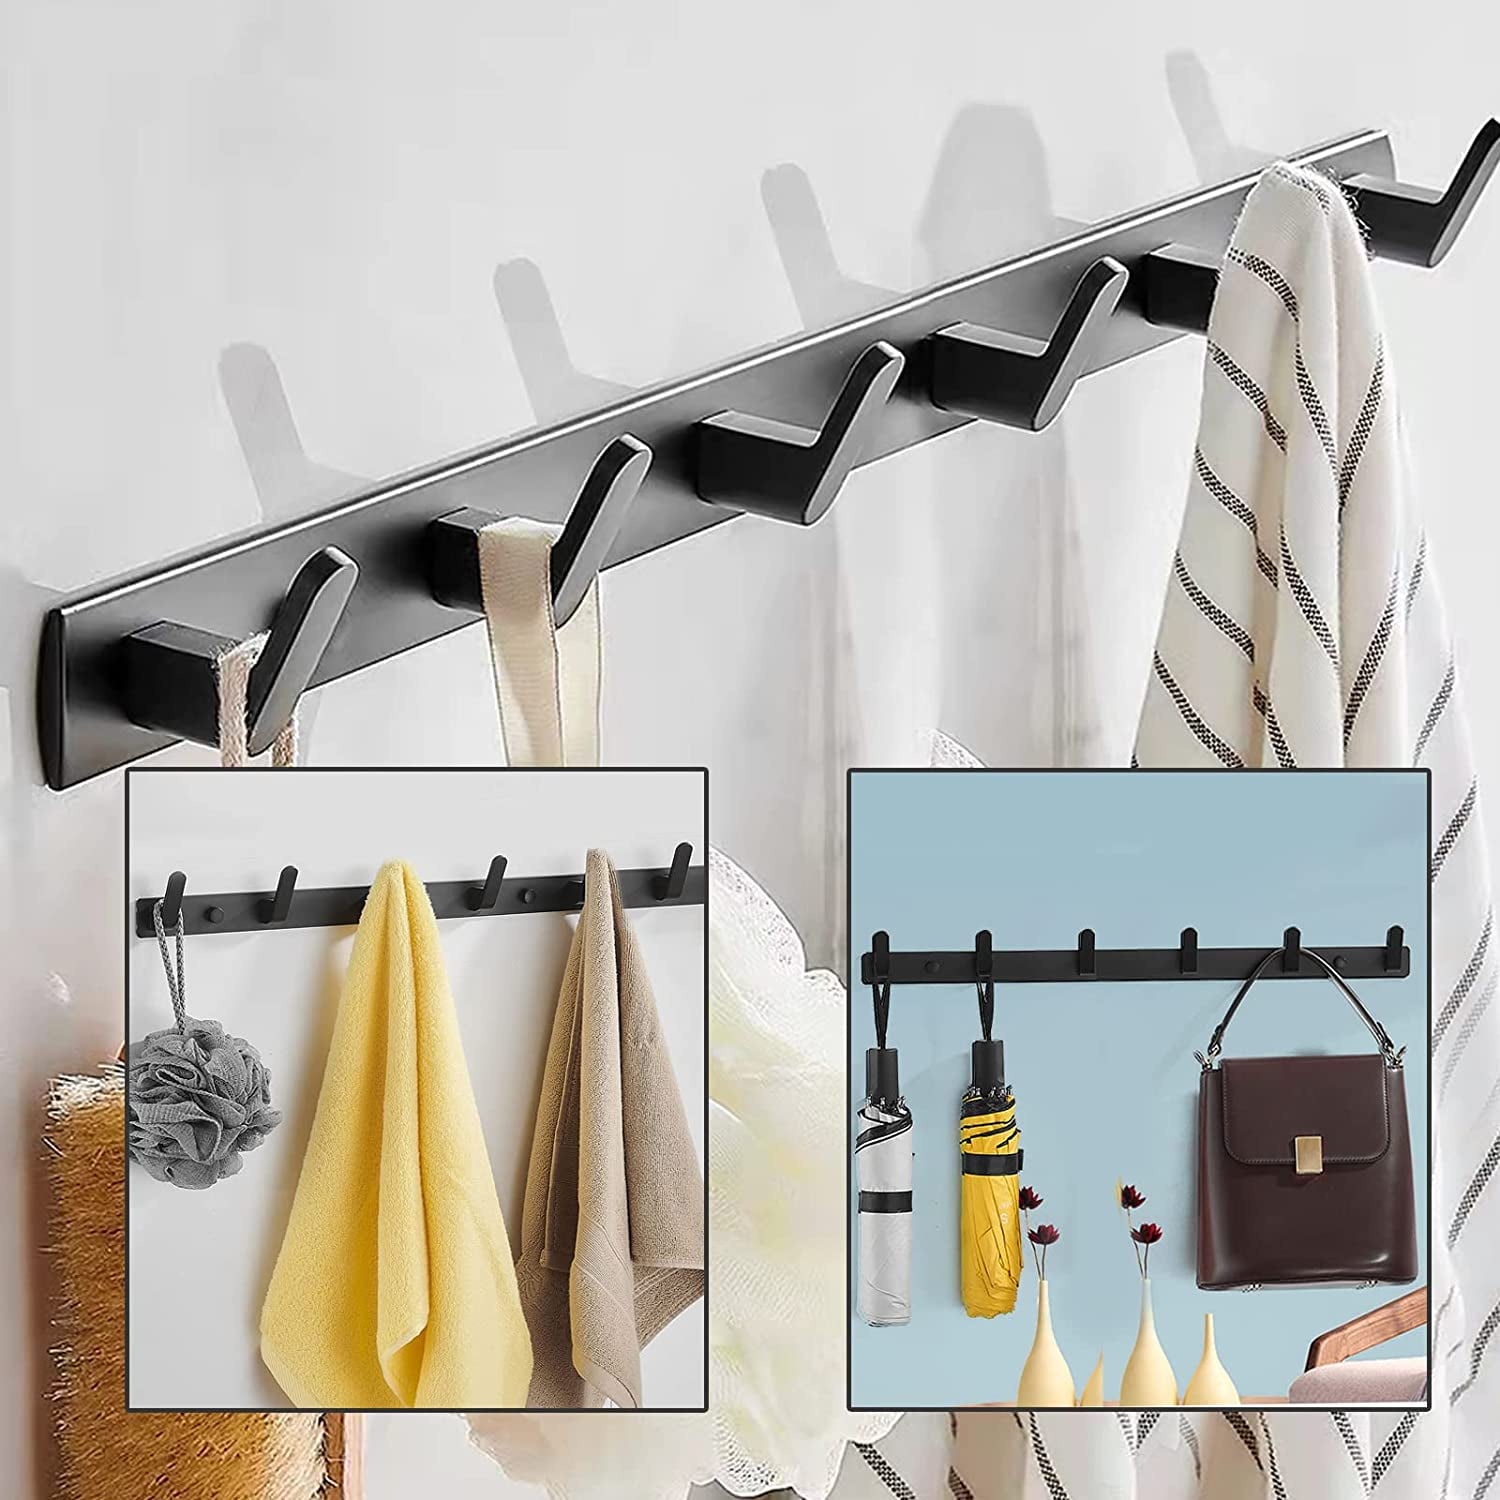 Hook | Hooks for Wall | Hooks for Clothes Hanging | Hooks for Hanging Heavy  Items |[ Hooks for Door | Hooks for Kitchen | Door Hooks for Clothes {Pack